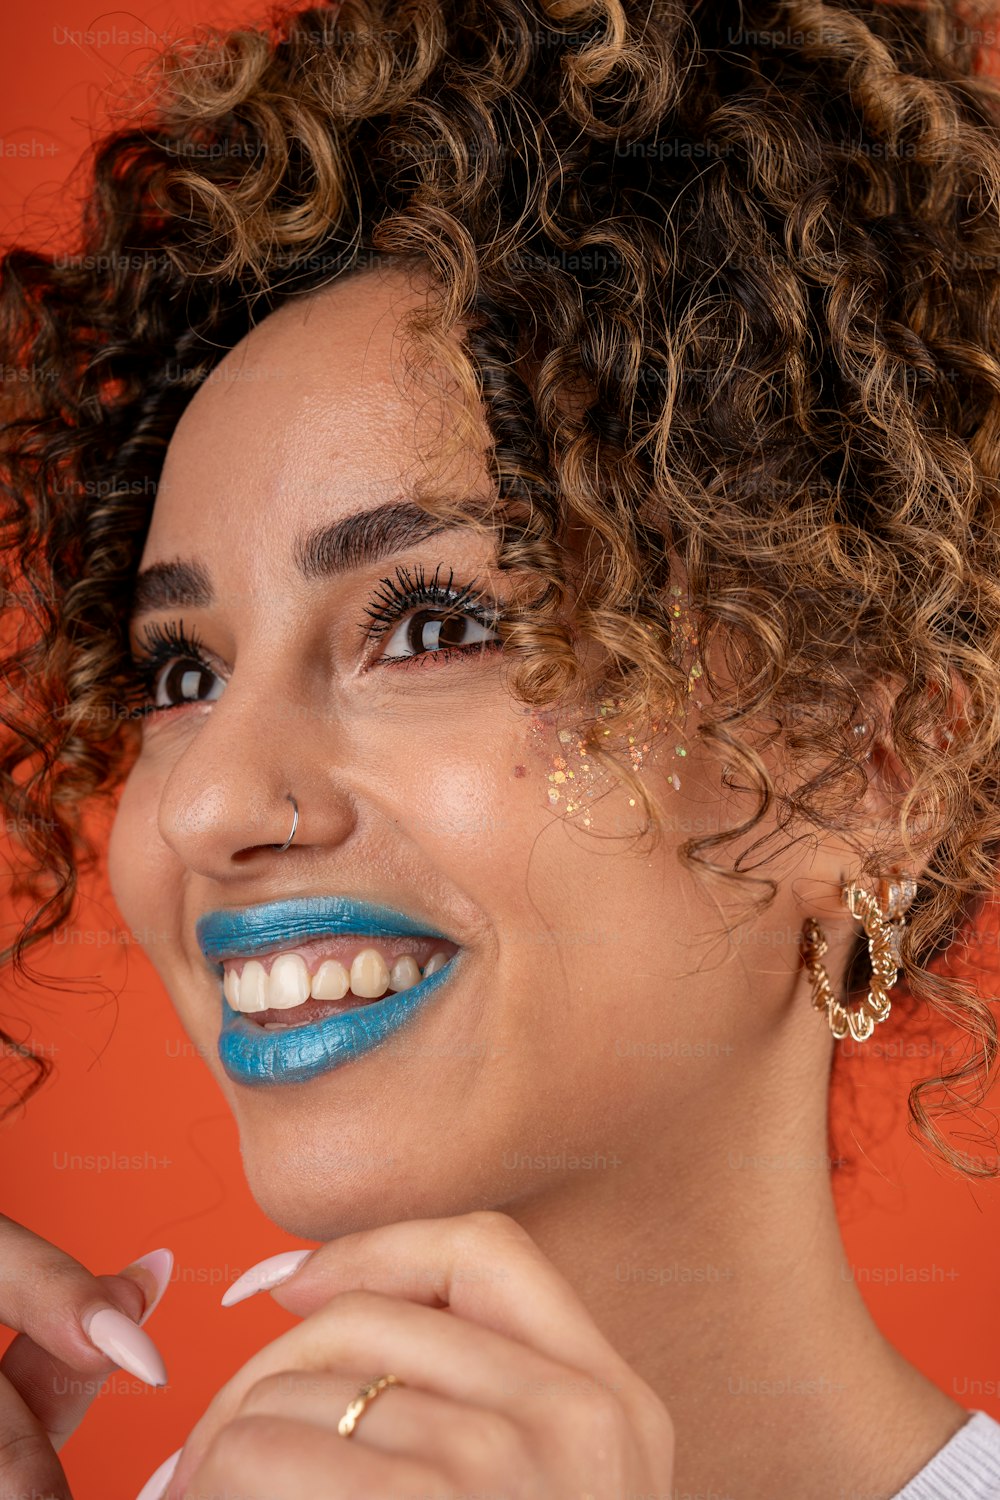 a close up of a person with blue lipstick